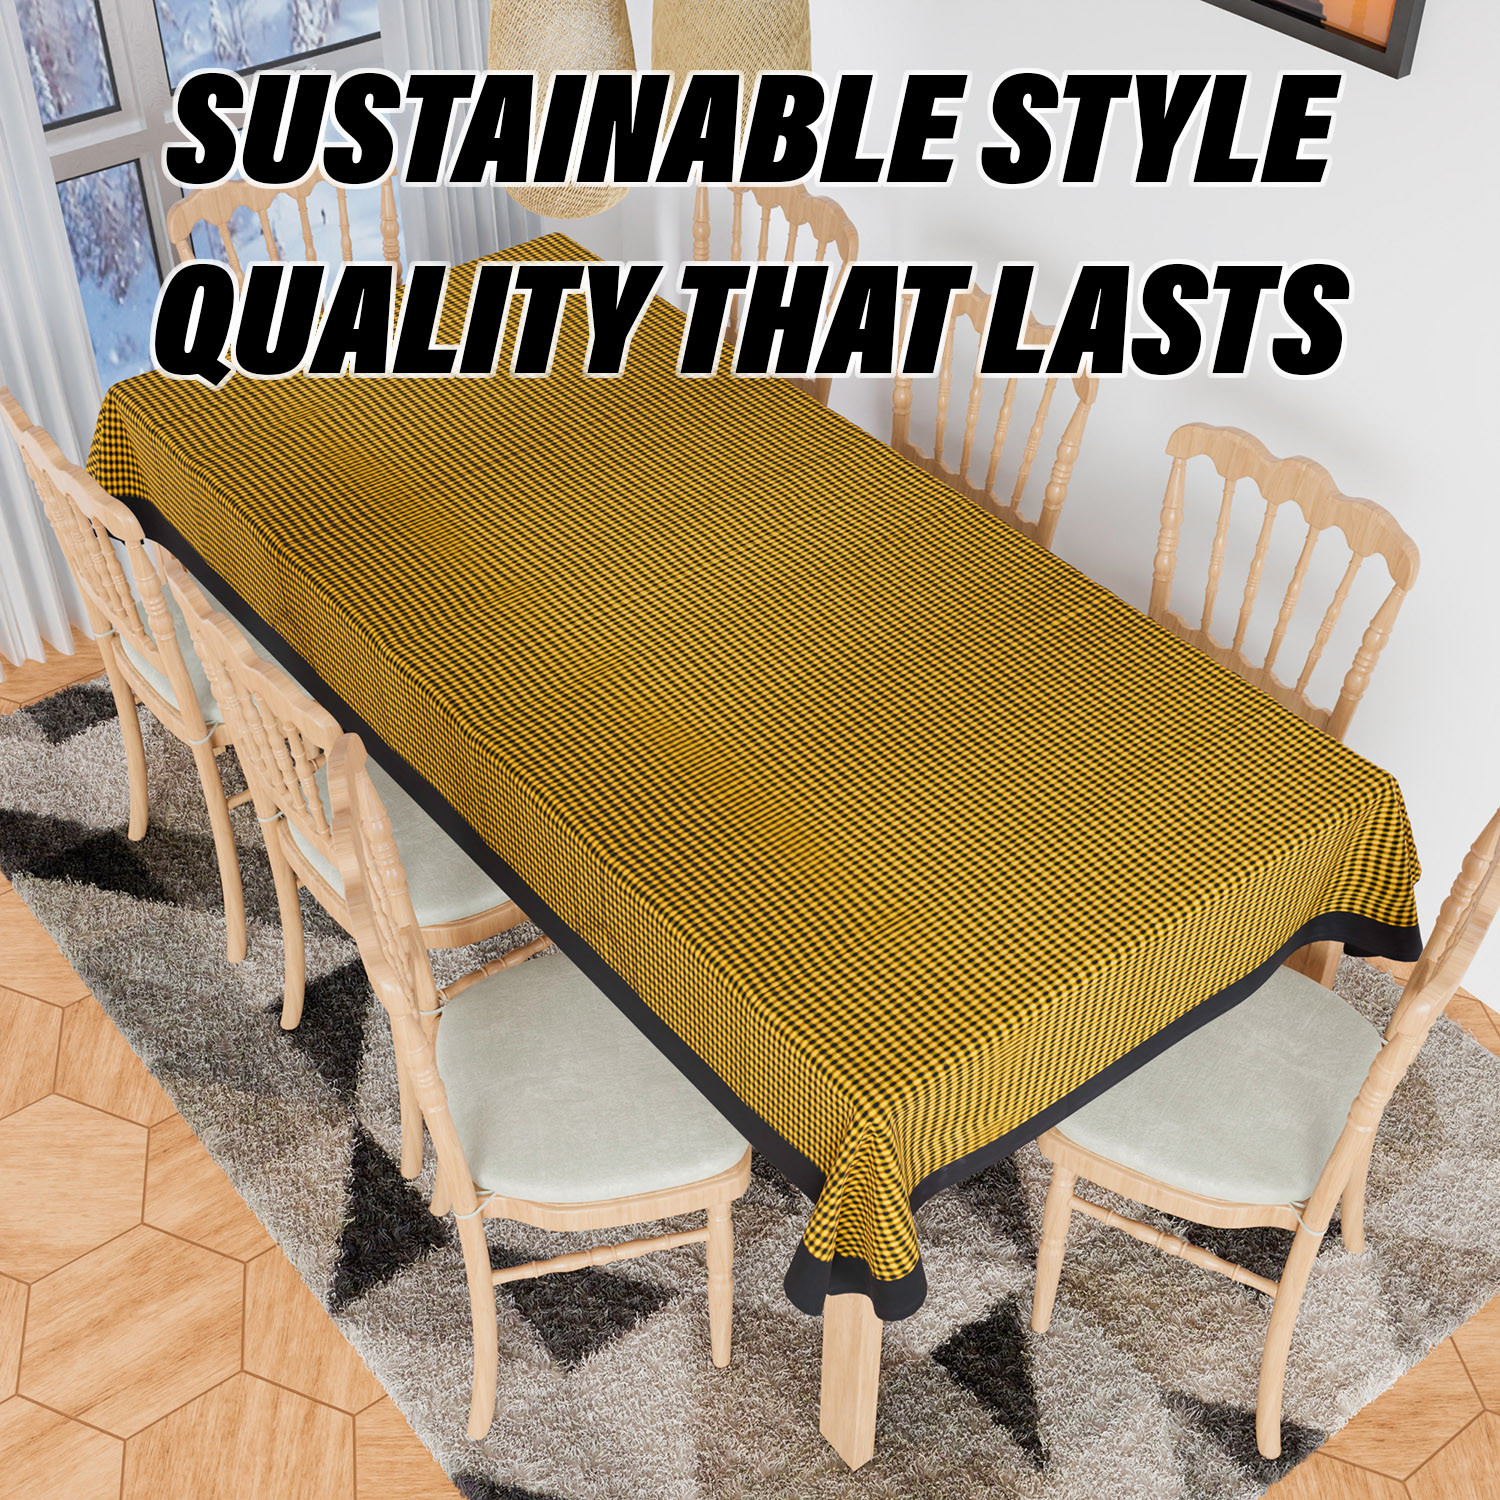 Kuber Industries Dining Table Cover | Cotton Table Cloth Cover | 8 Seater Table Cloth | Barik Check Table Cover | Table Protector | Table Cover for Dining Table | 60x108 Inch | DTC | Yellow